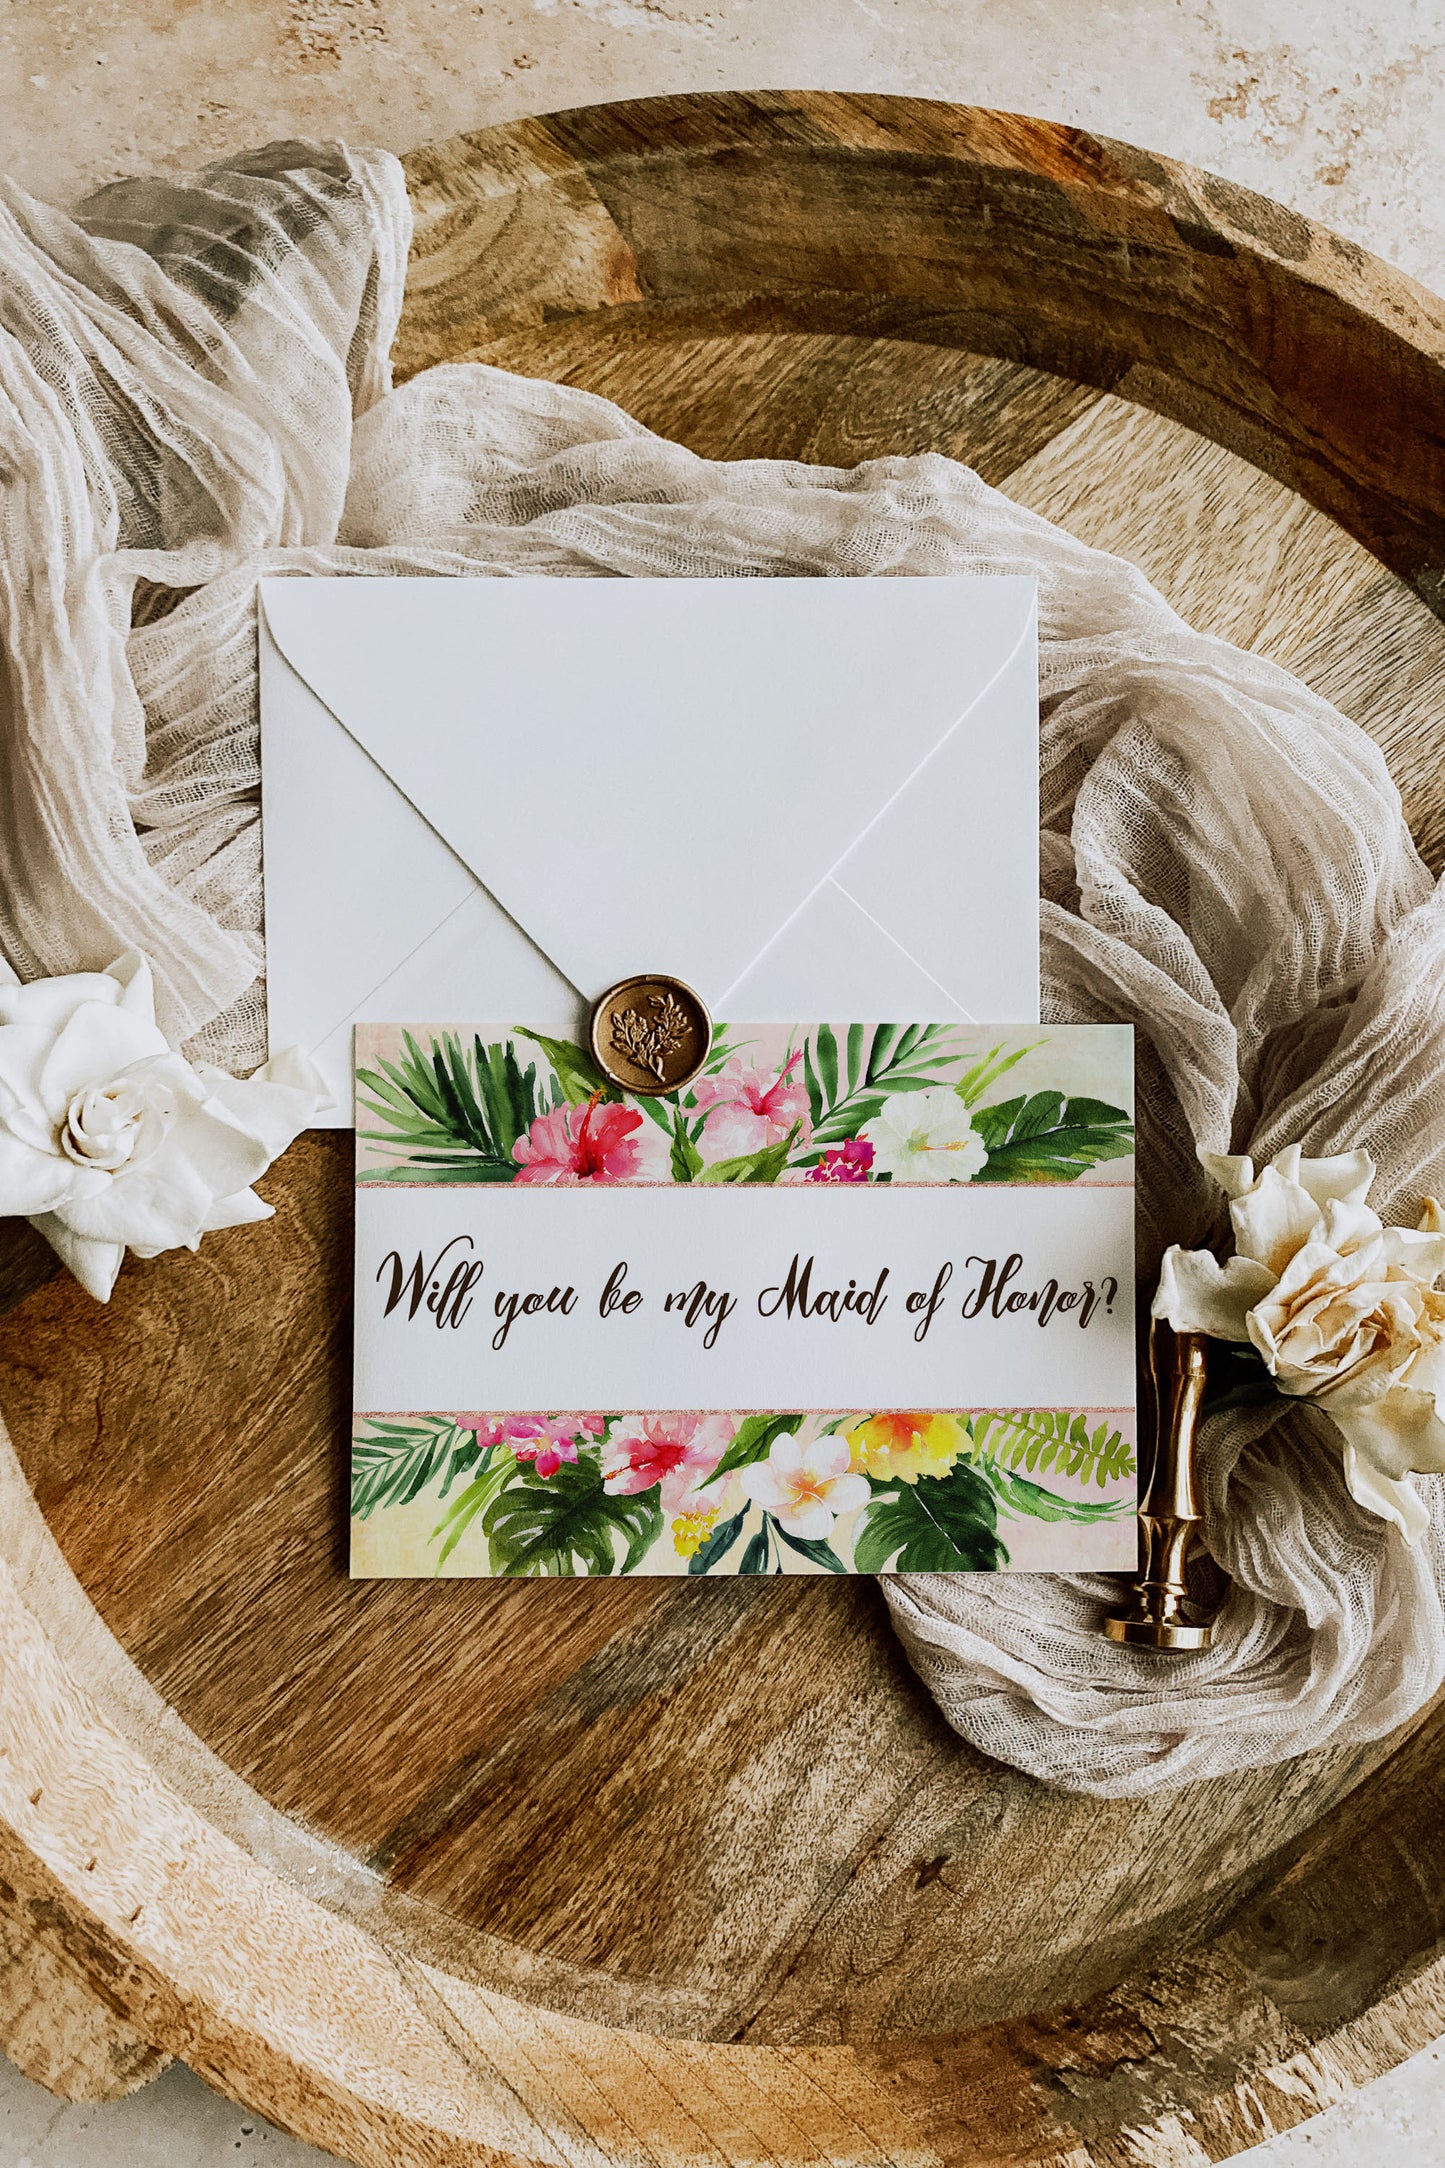 Tropical Floral Watercolor Beach Destination "Will you be my Maid of Honor" Digital "Instant Download" Invitation 1 - 'TROPICAL LUSH"